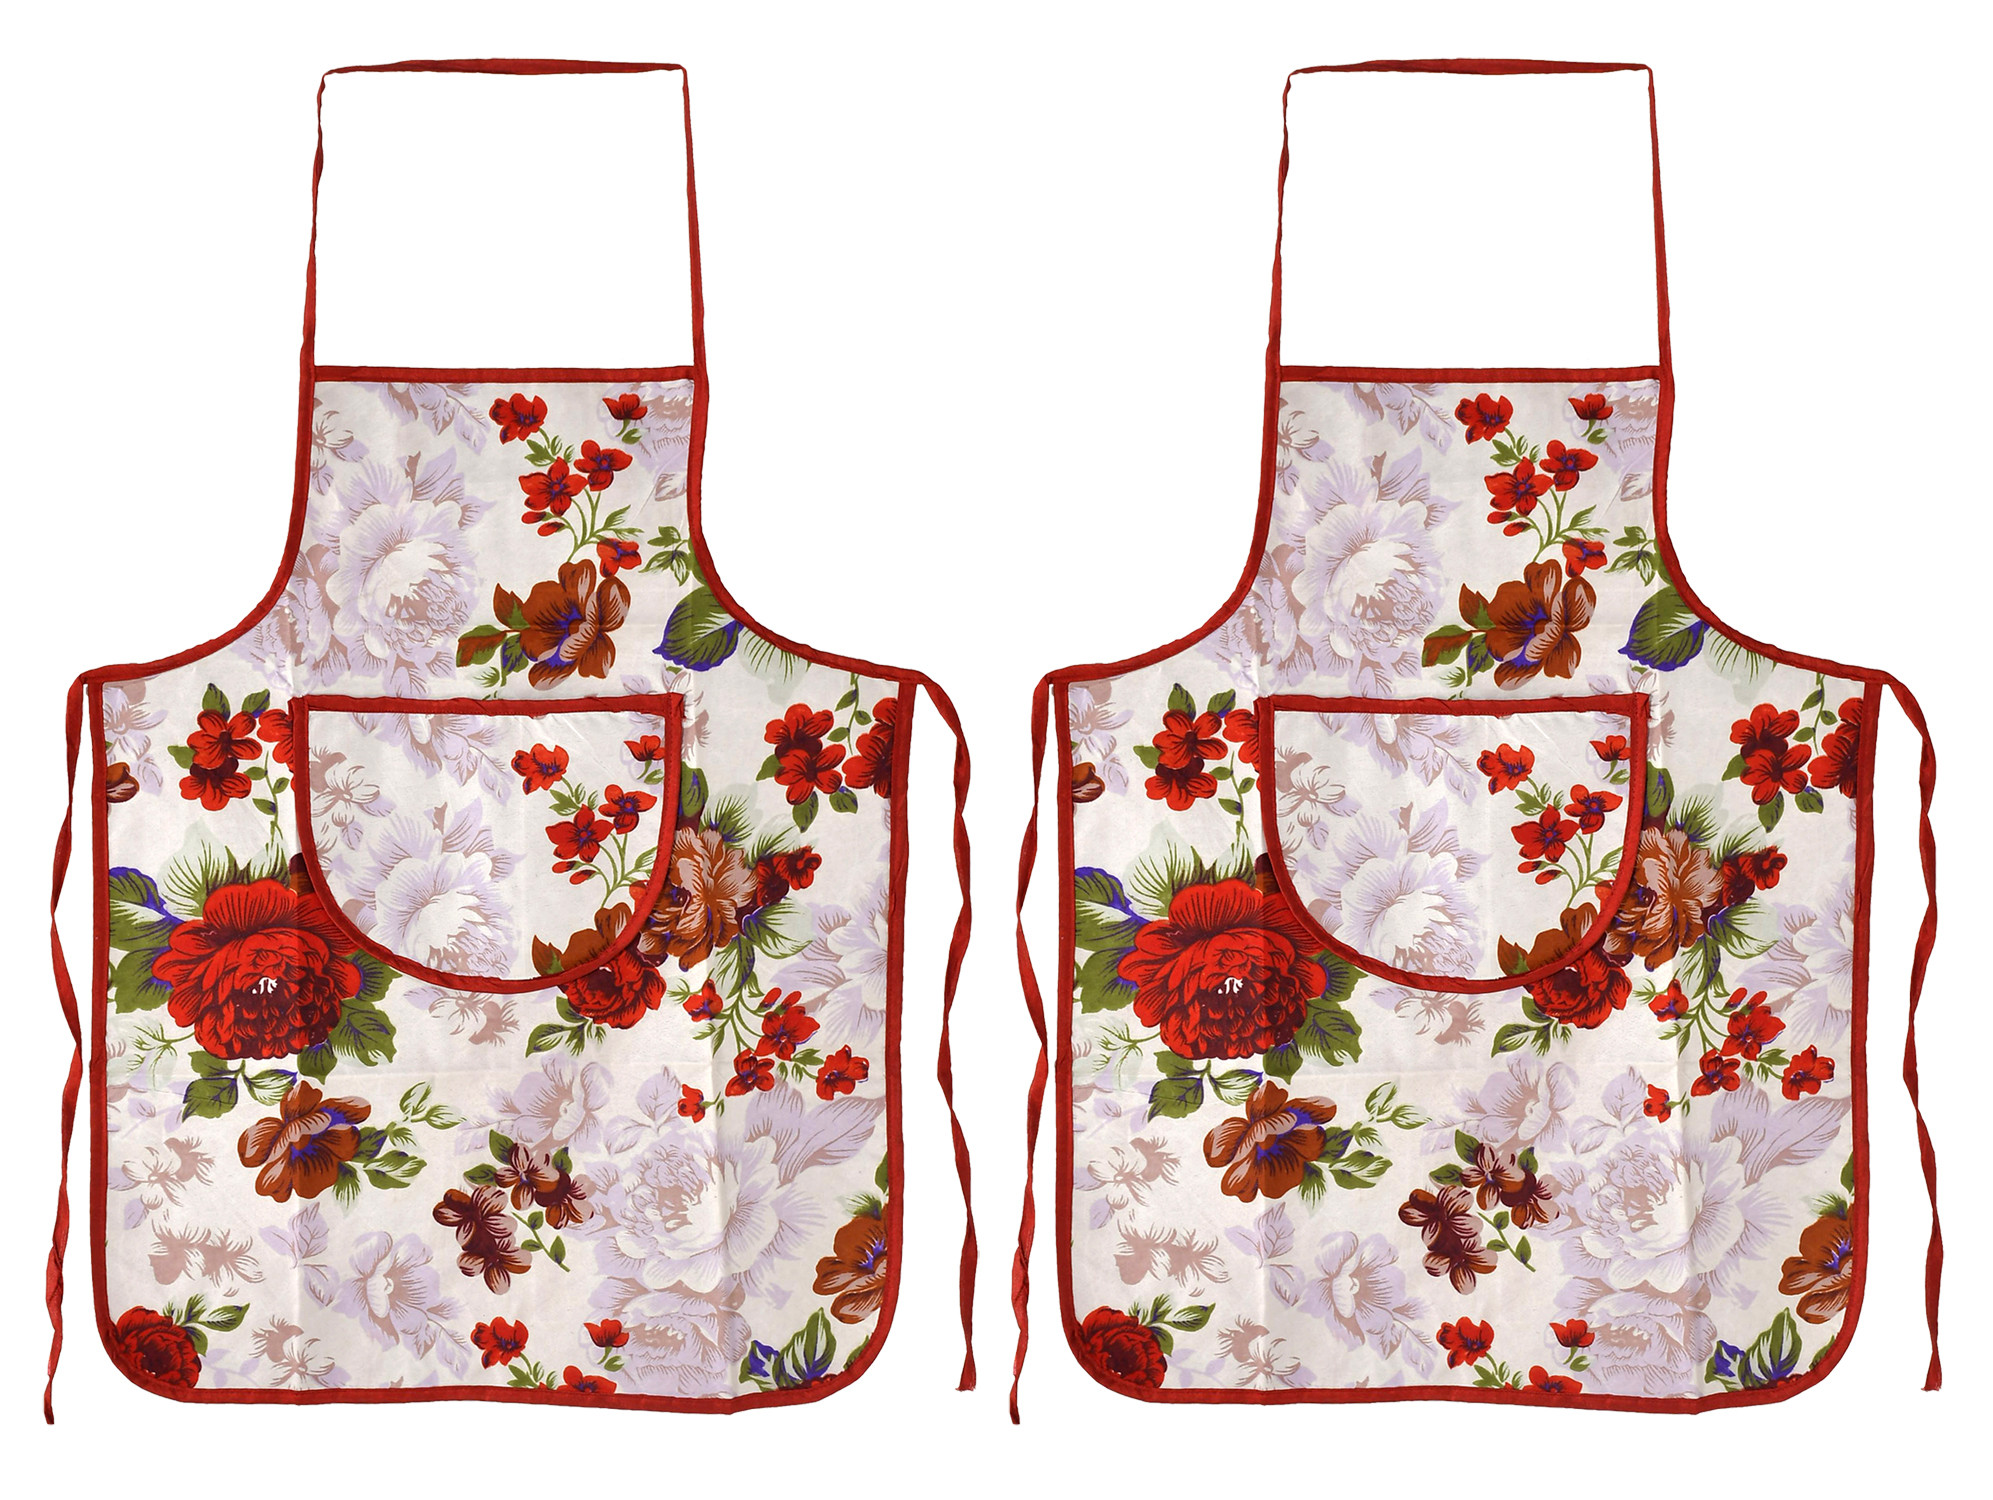 Kuber Industries Flower Printed Apron with 1Front Pocket (Red)